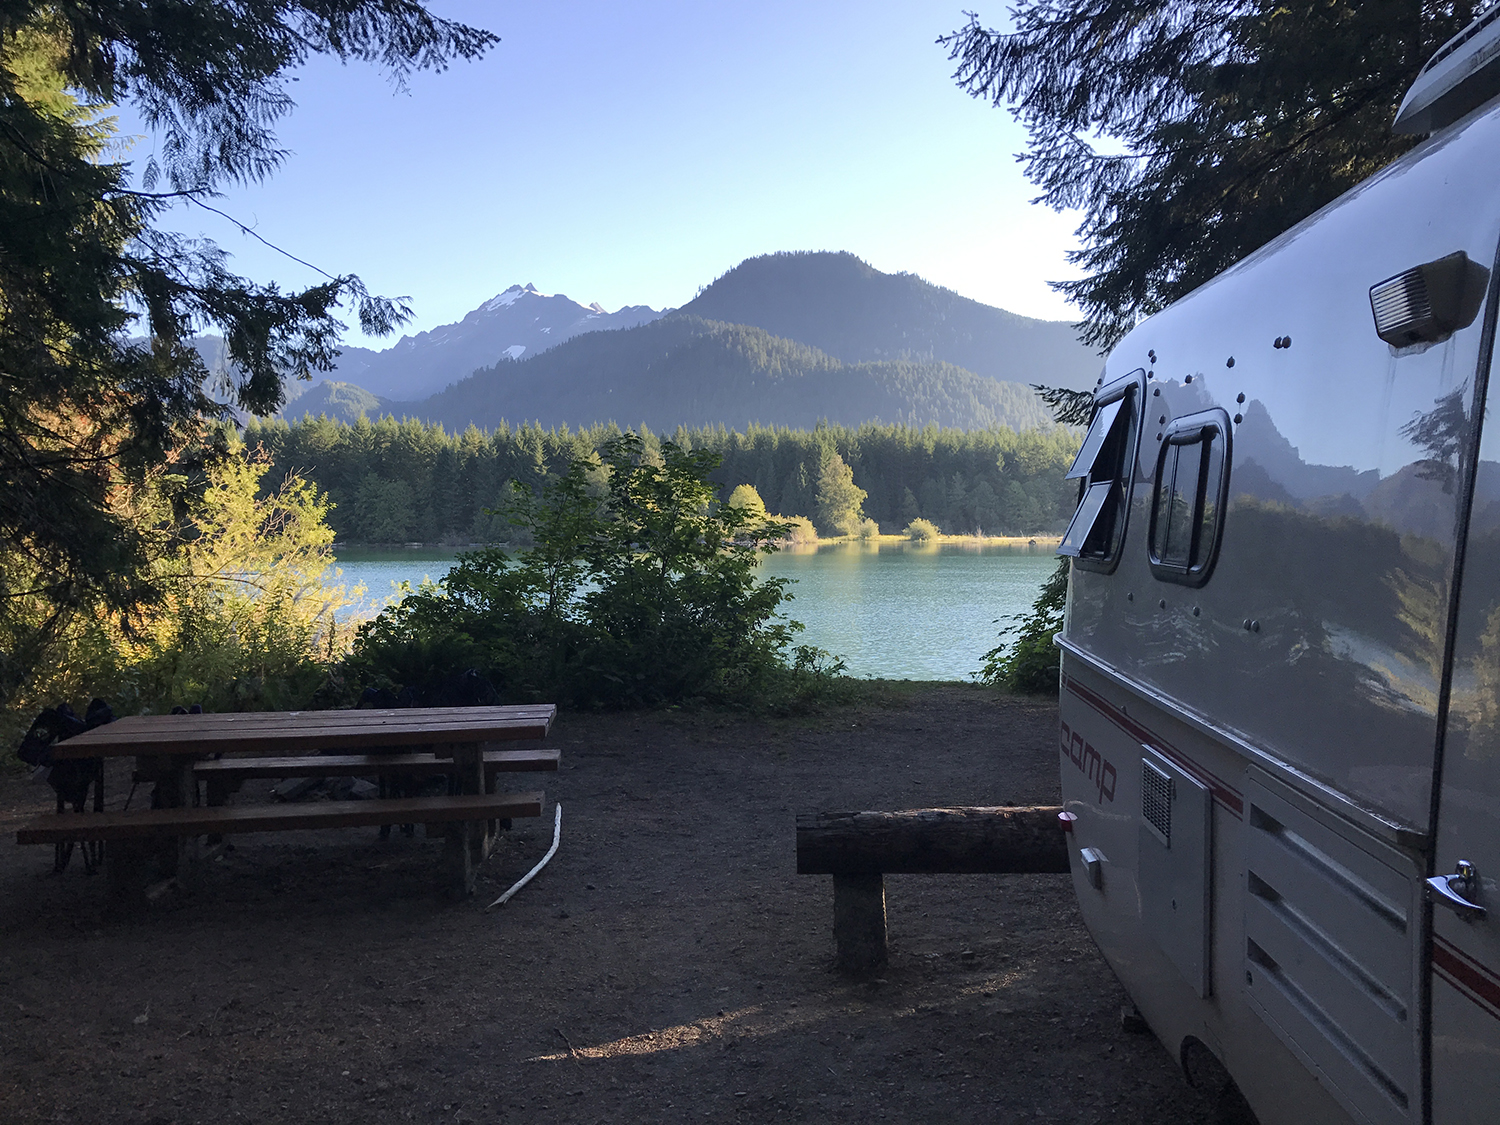 A photograph of a camper at a campsite on a lake. Across the lake is a mountain. The scene looks very pleasant.